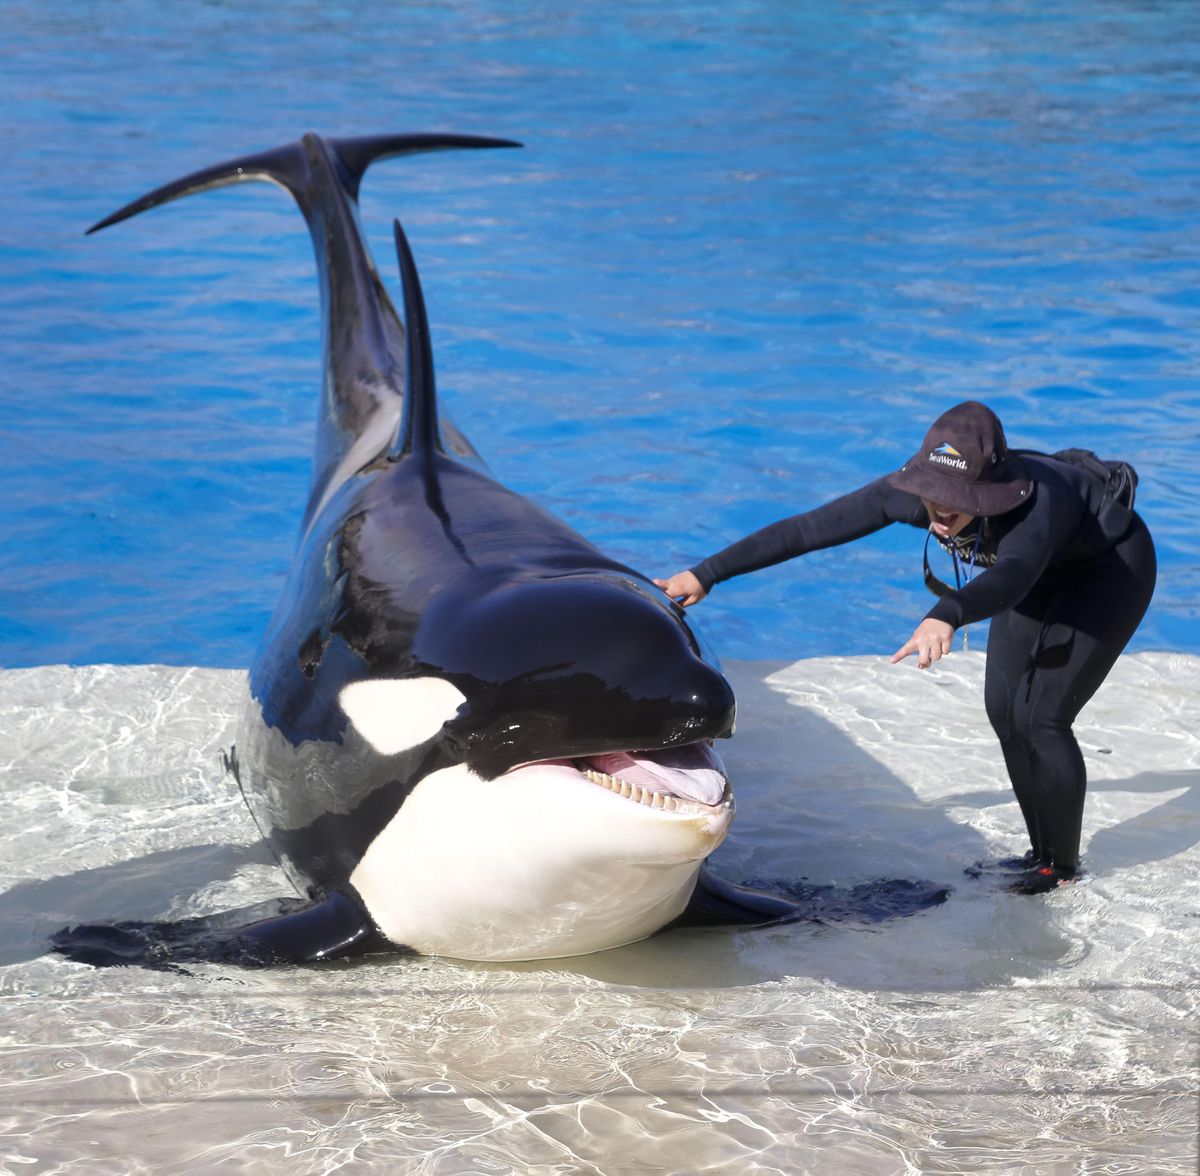 Kalia, a 12-year-old orca whale, rehearses with a trainer last month for the new Orca Encounter at SeaWorld San Diego. (Howard Lipin / Tribune News Service)